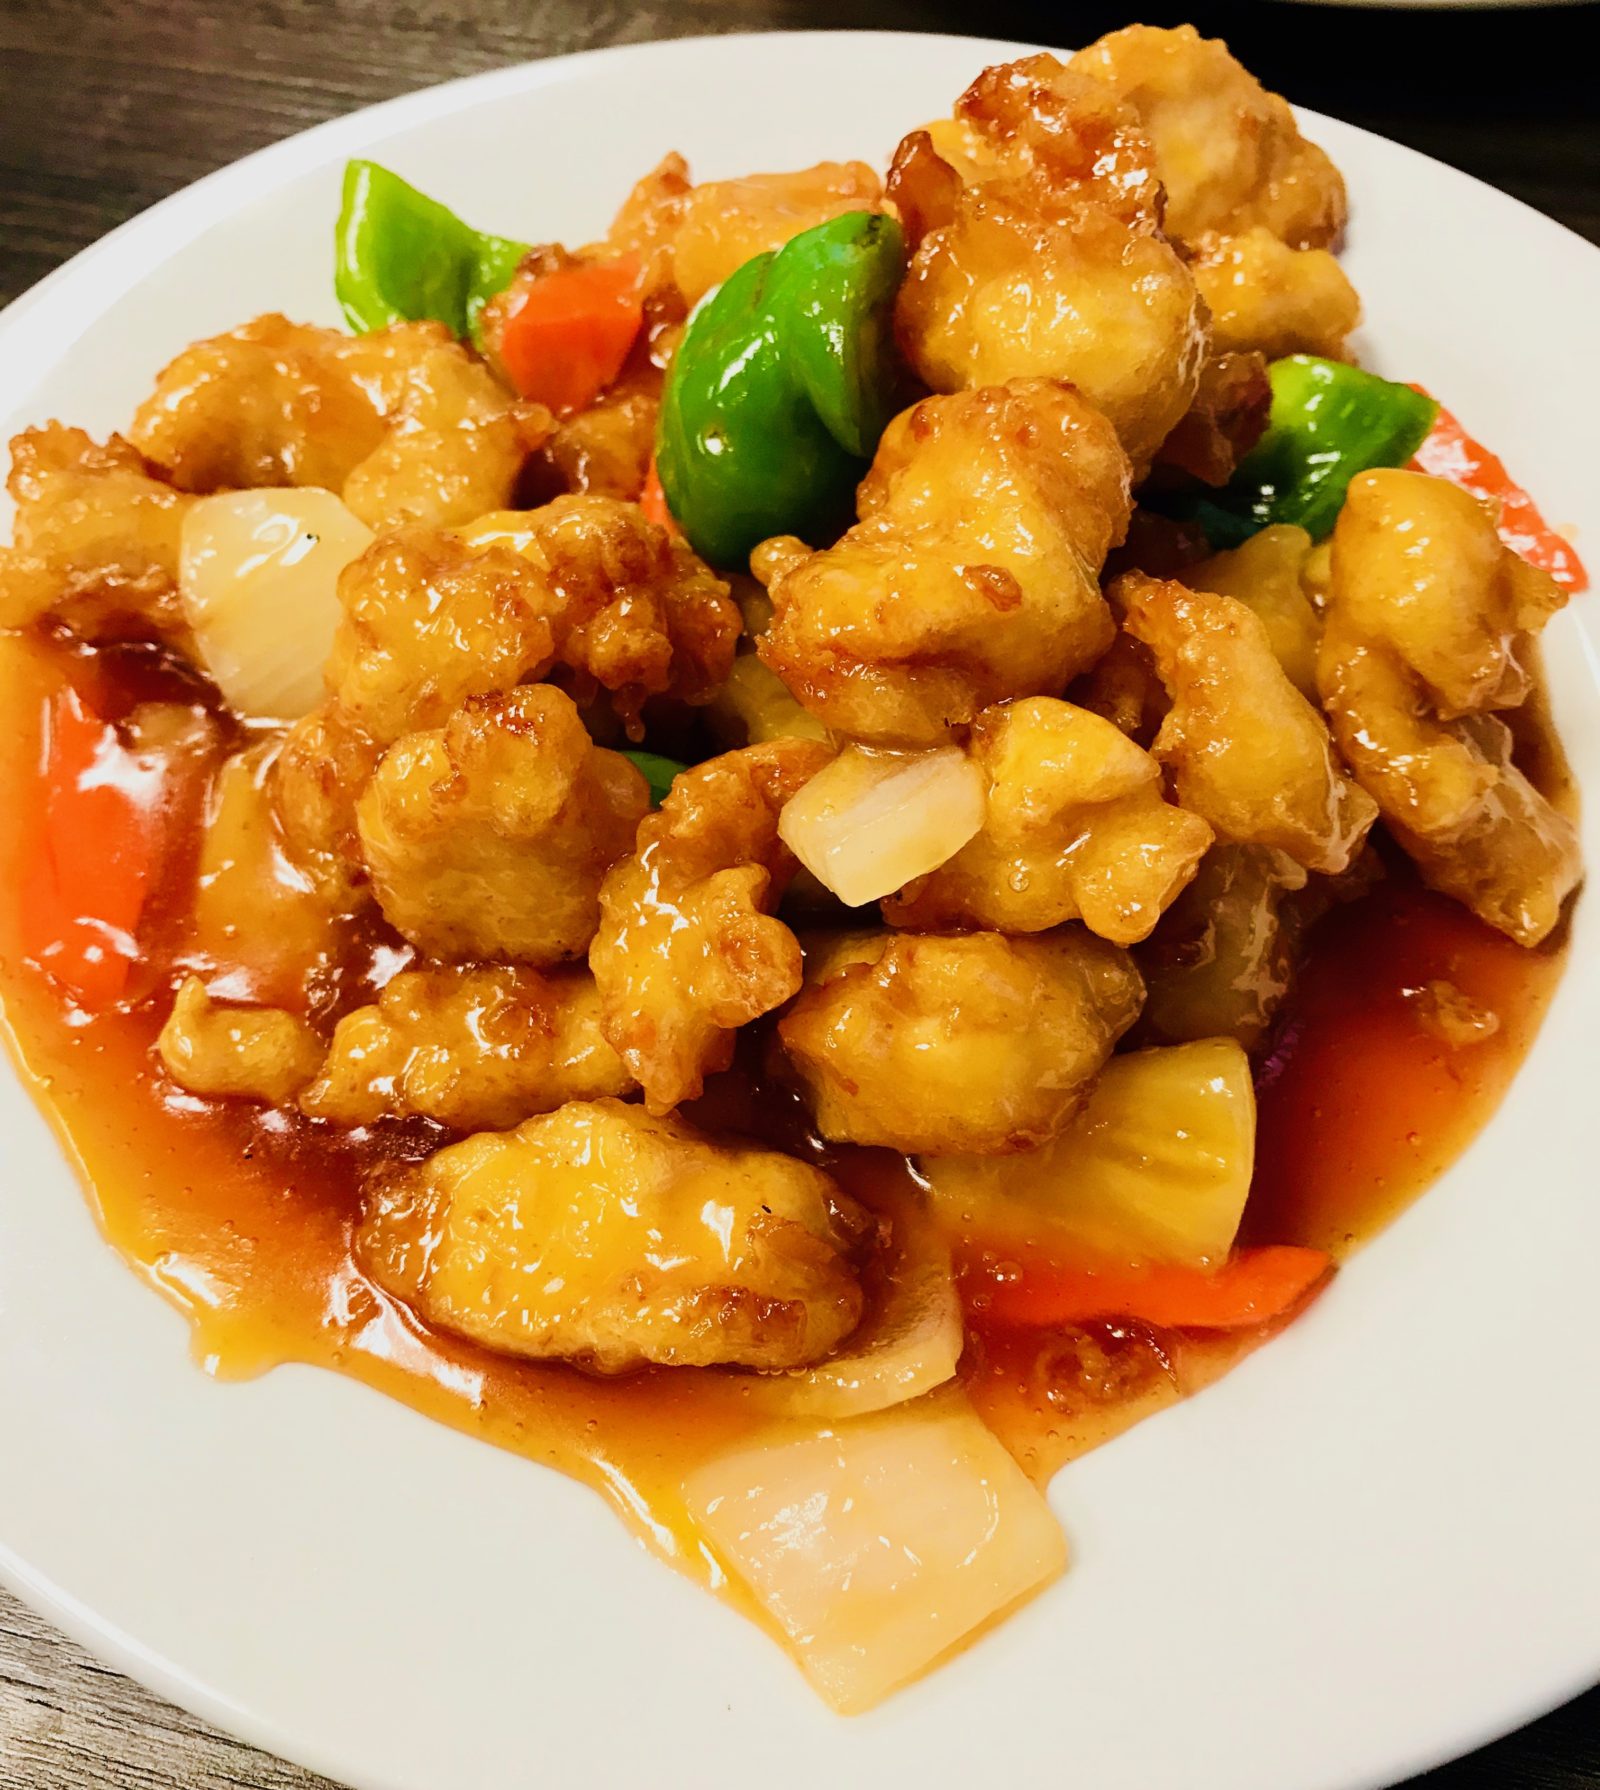 Pick of the Week - Asian Paradise - Honey Chicken